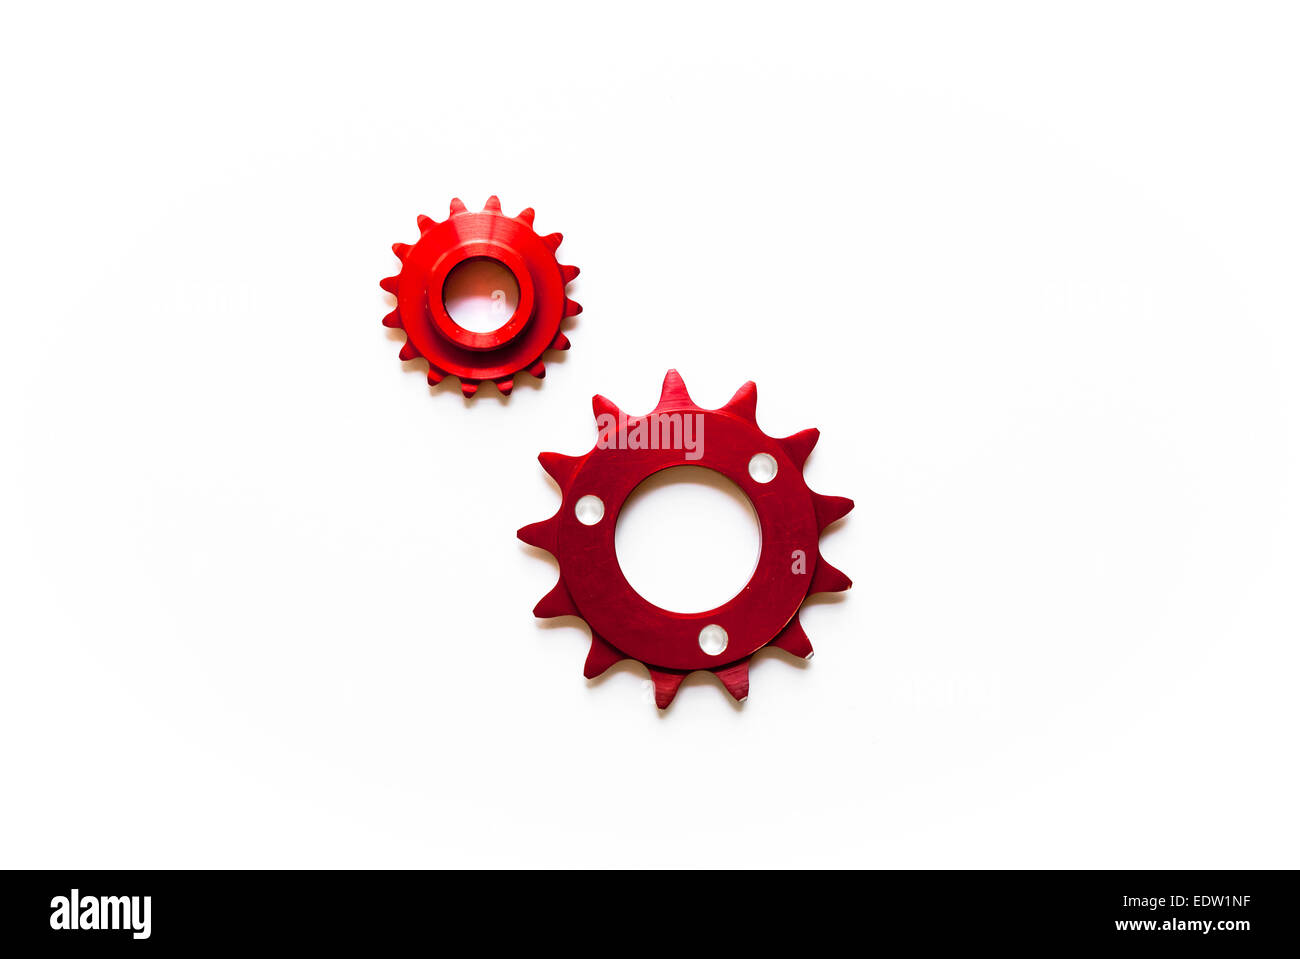 Gears Cut Out Stock Images & Pictures - Alamy